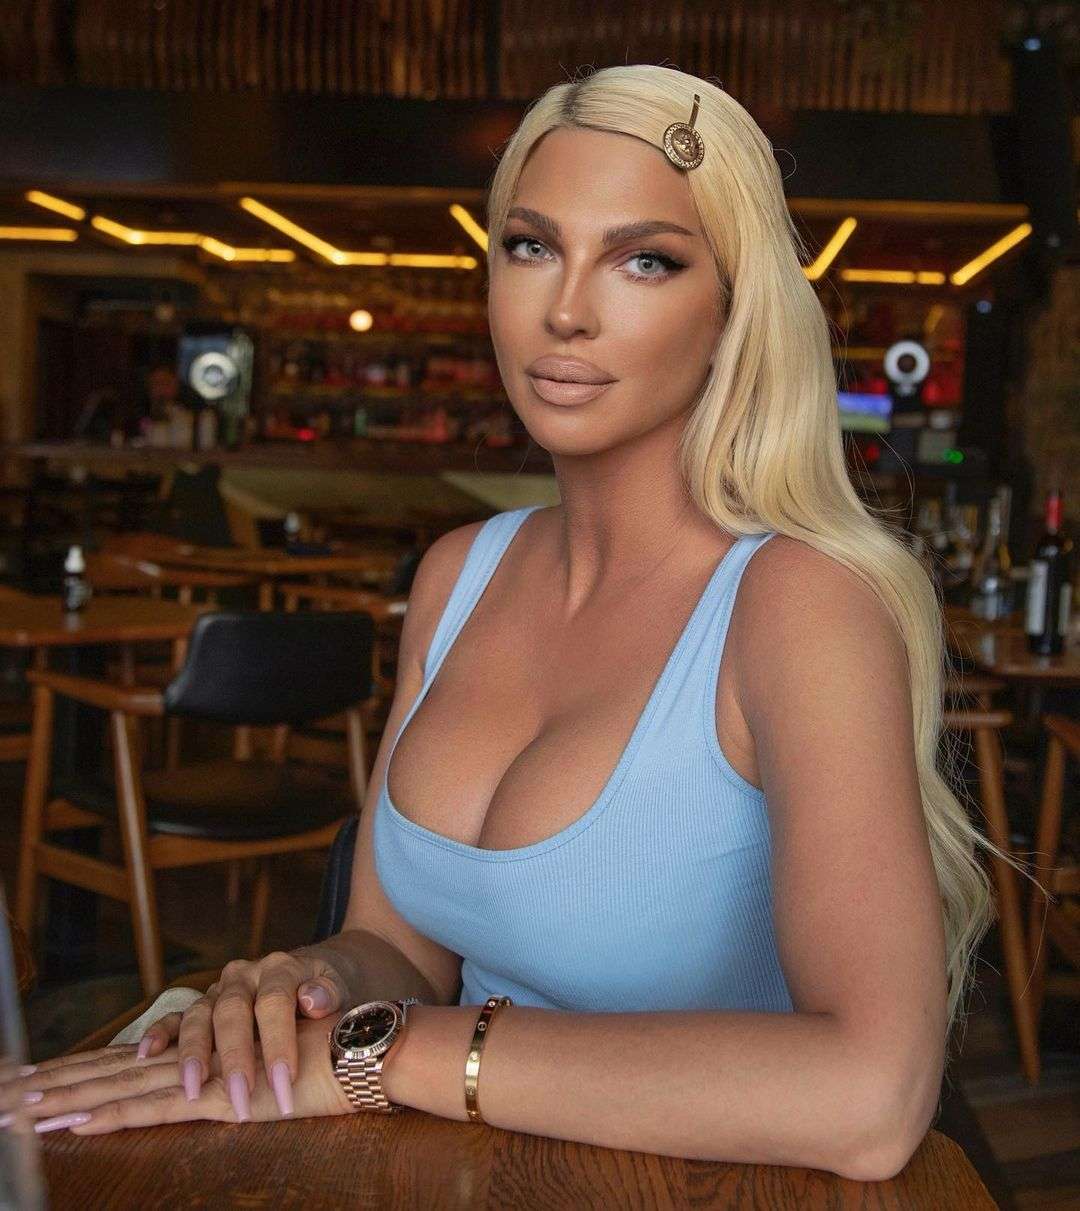 55+ Hot Pictures Of Jelena Karleusa Are Too Damn Appealing | Best Of Comic Books